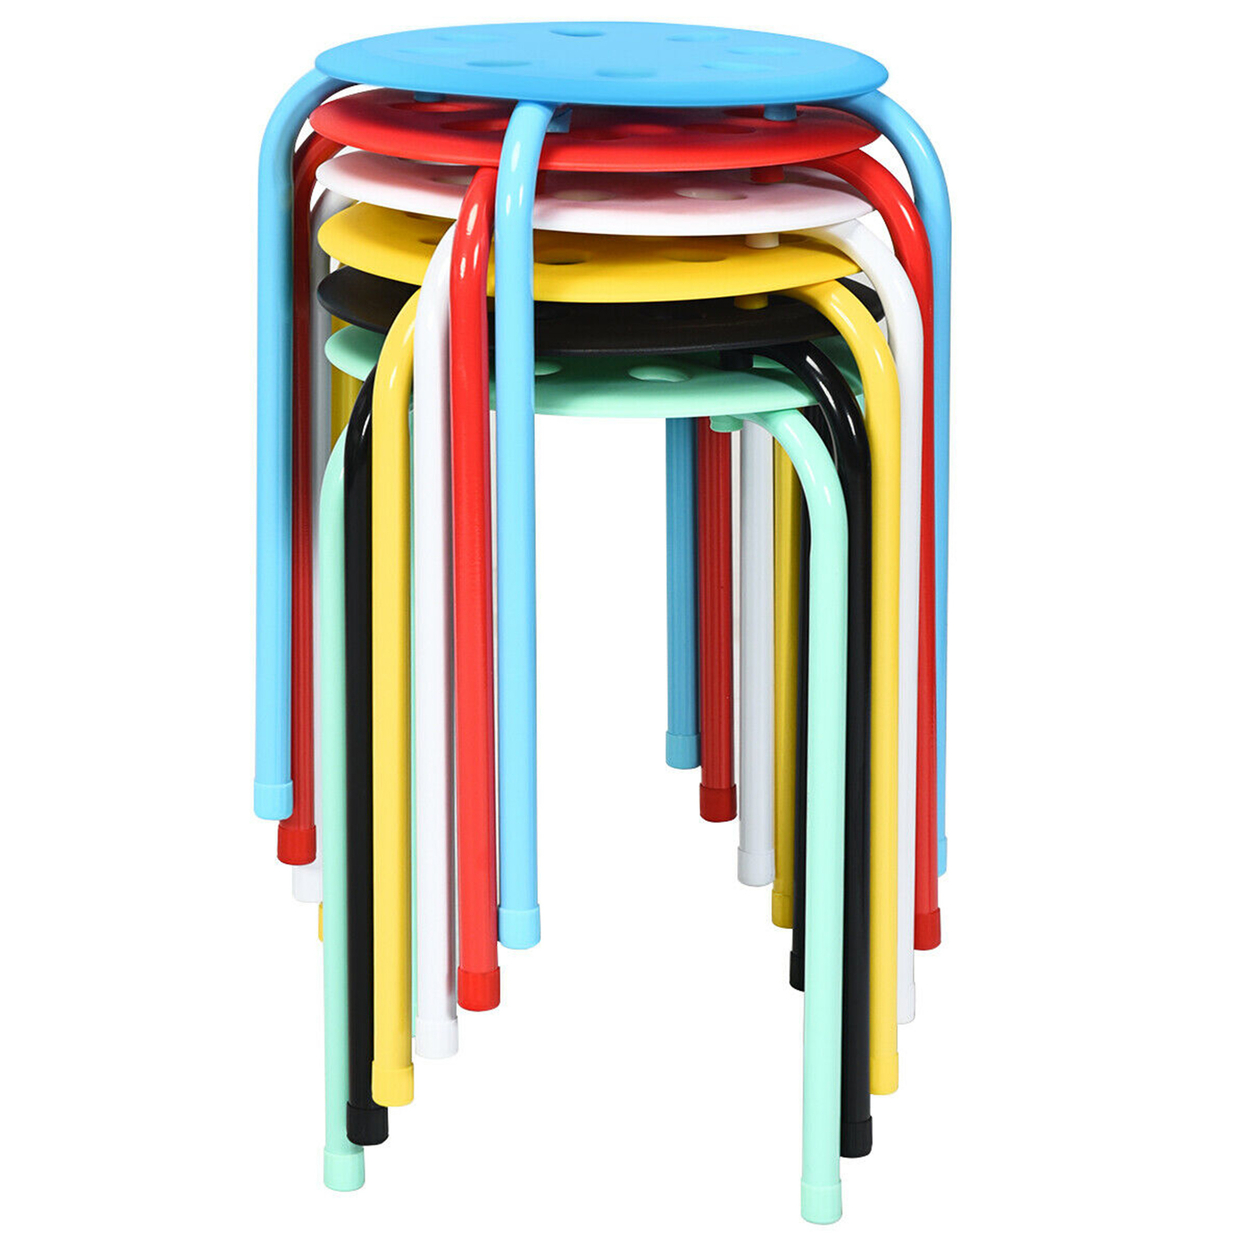 Set Of 6 Portable Plastic Stack Stools Backless Classroom Seating - Assorted Colors